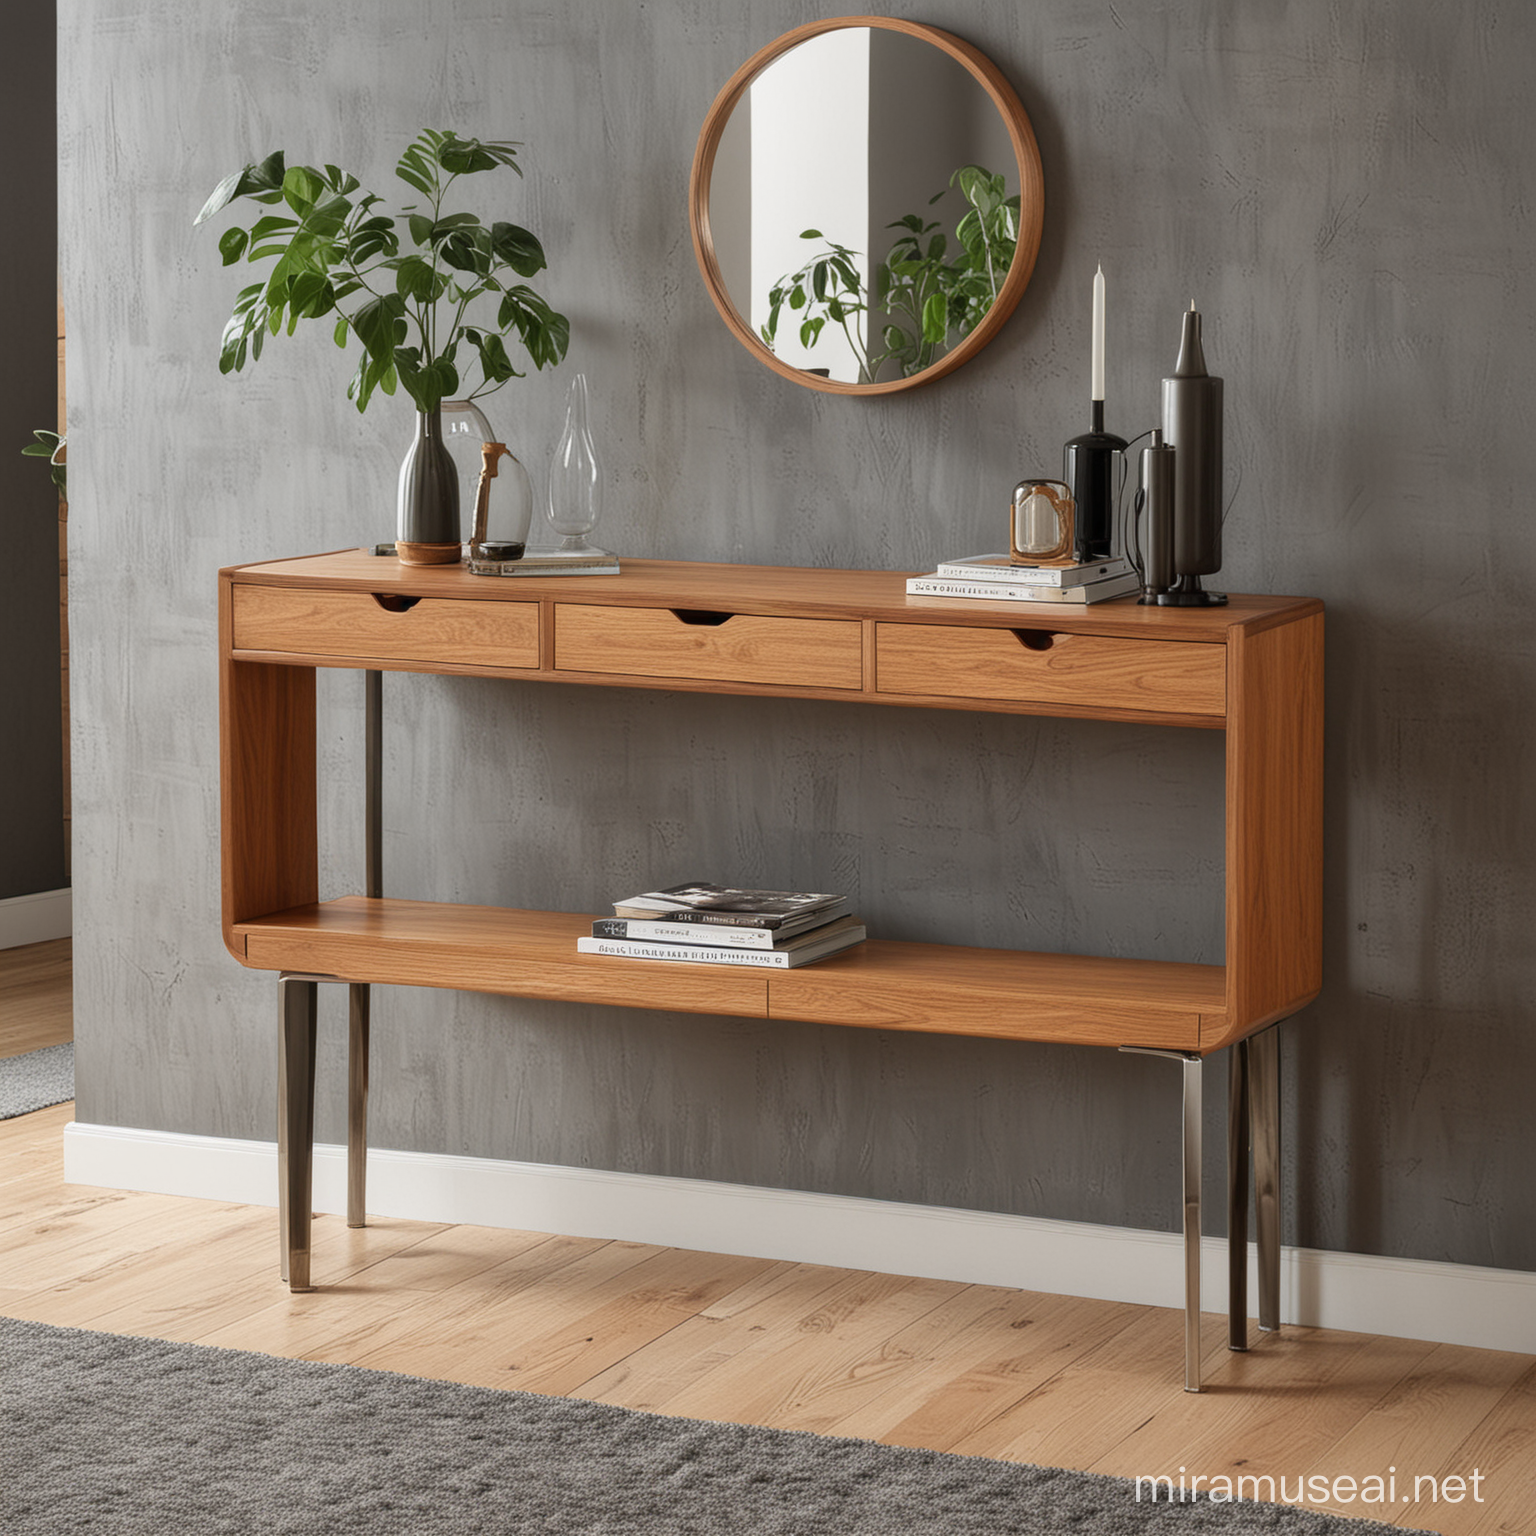 Mid Century Modern Console Table Design with Corbusier Touch